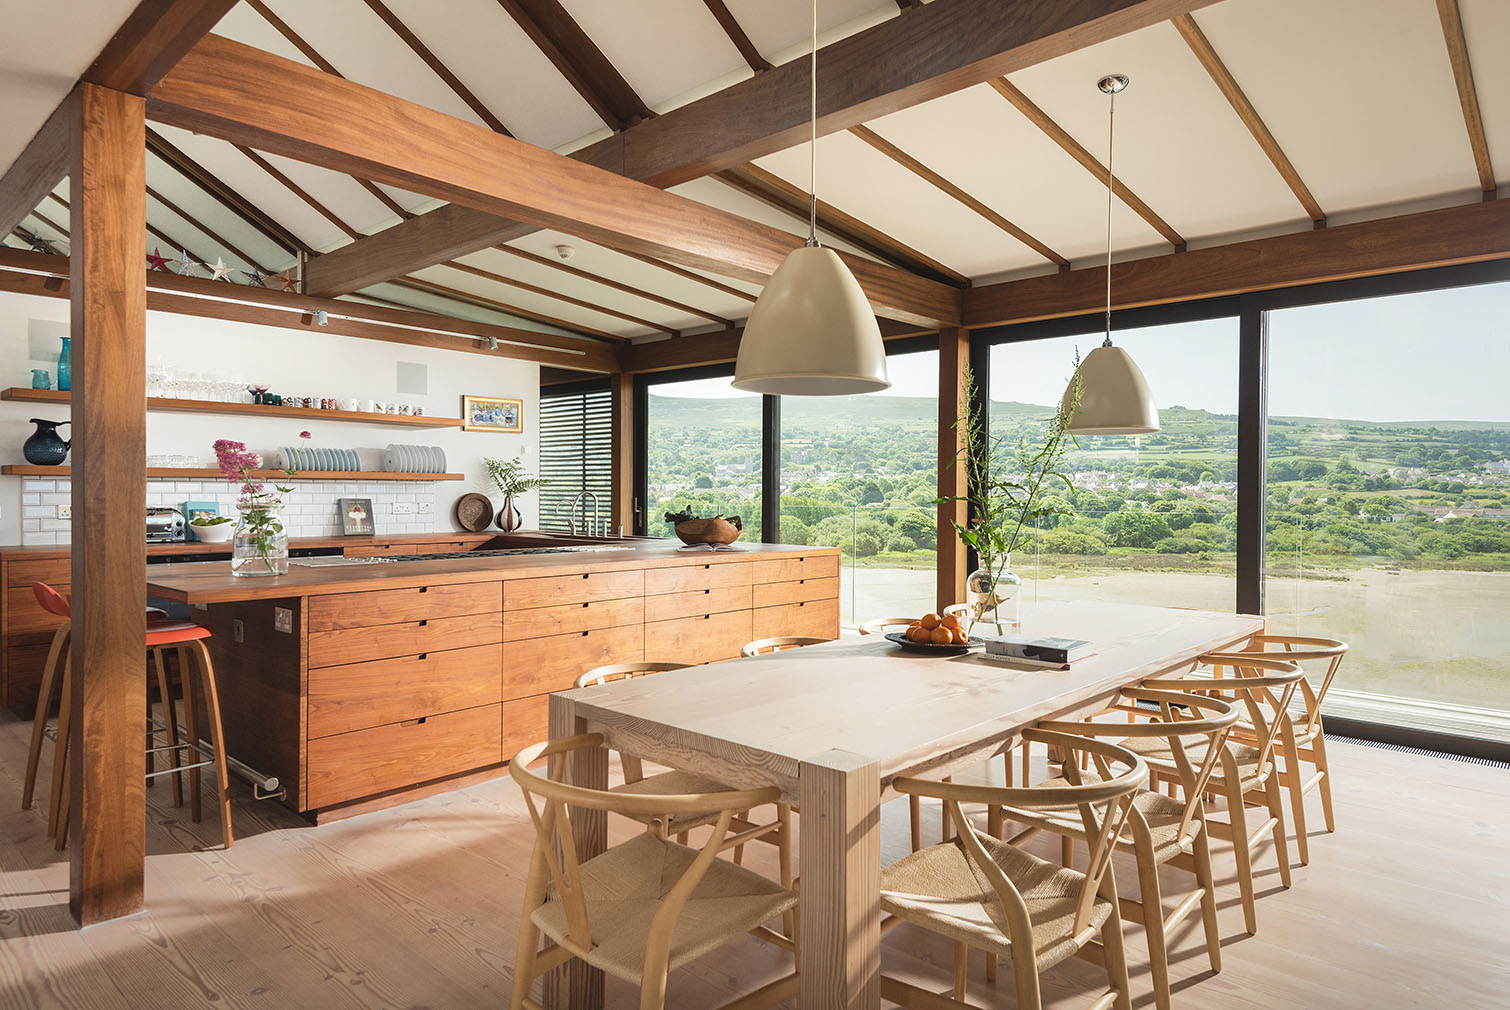 Welsh holiday home designed by John Pardey Architects